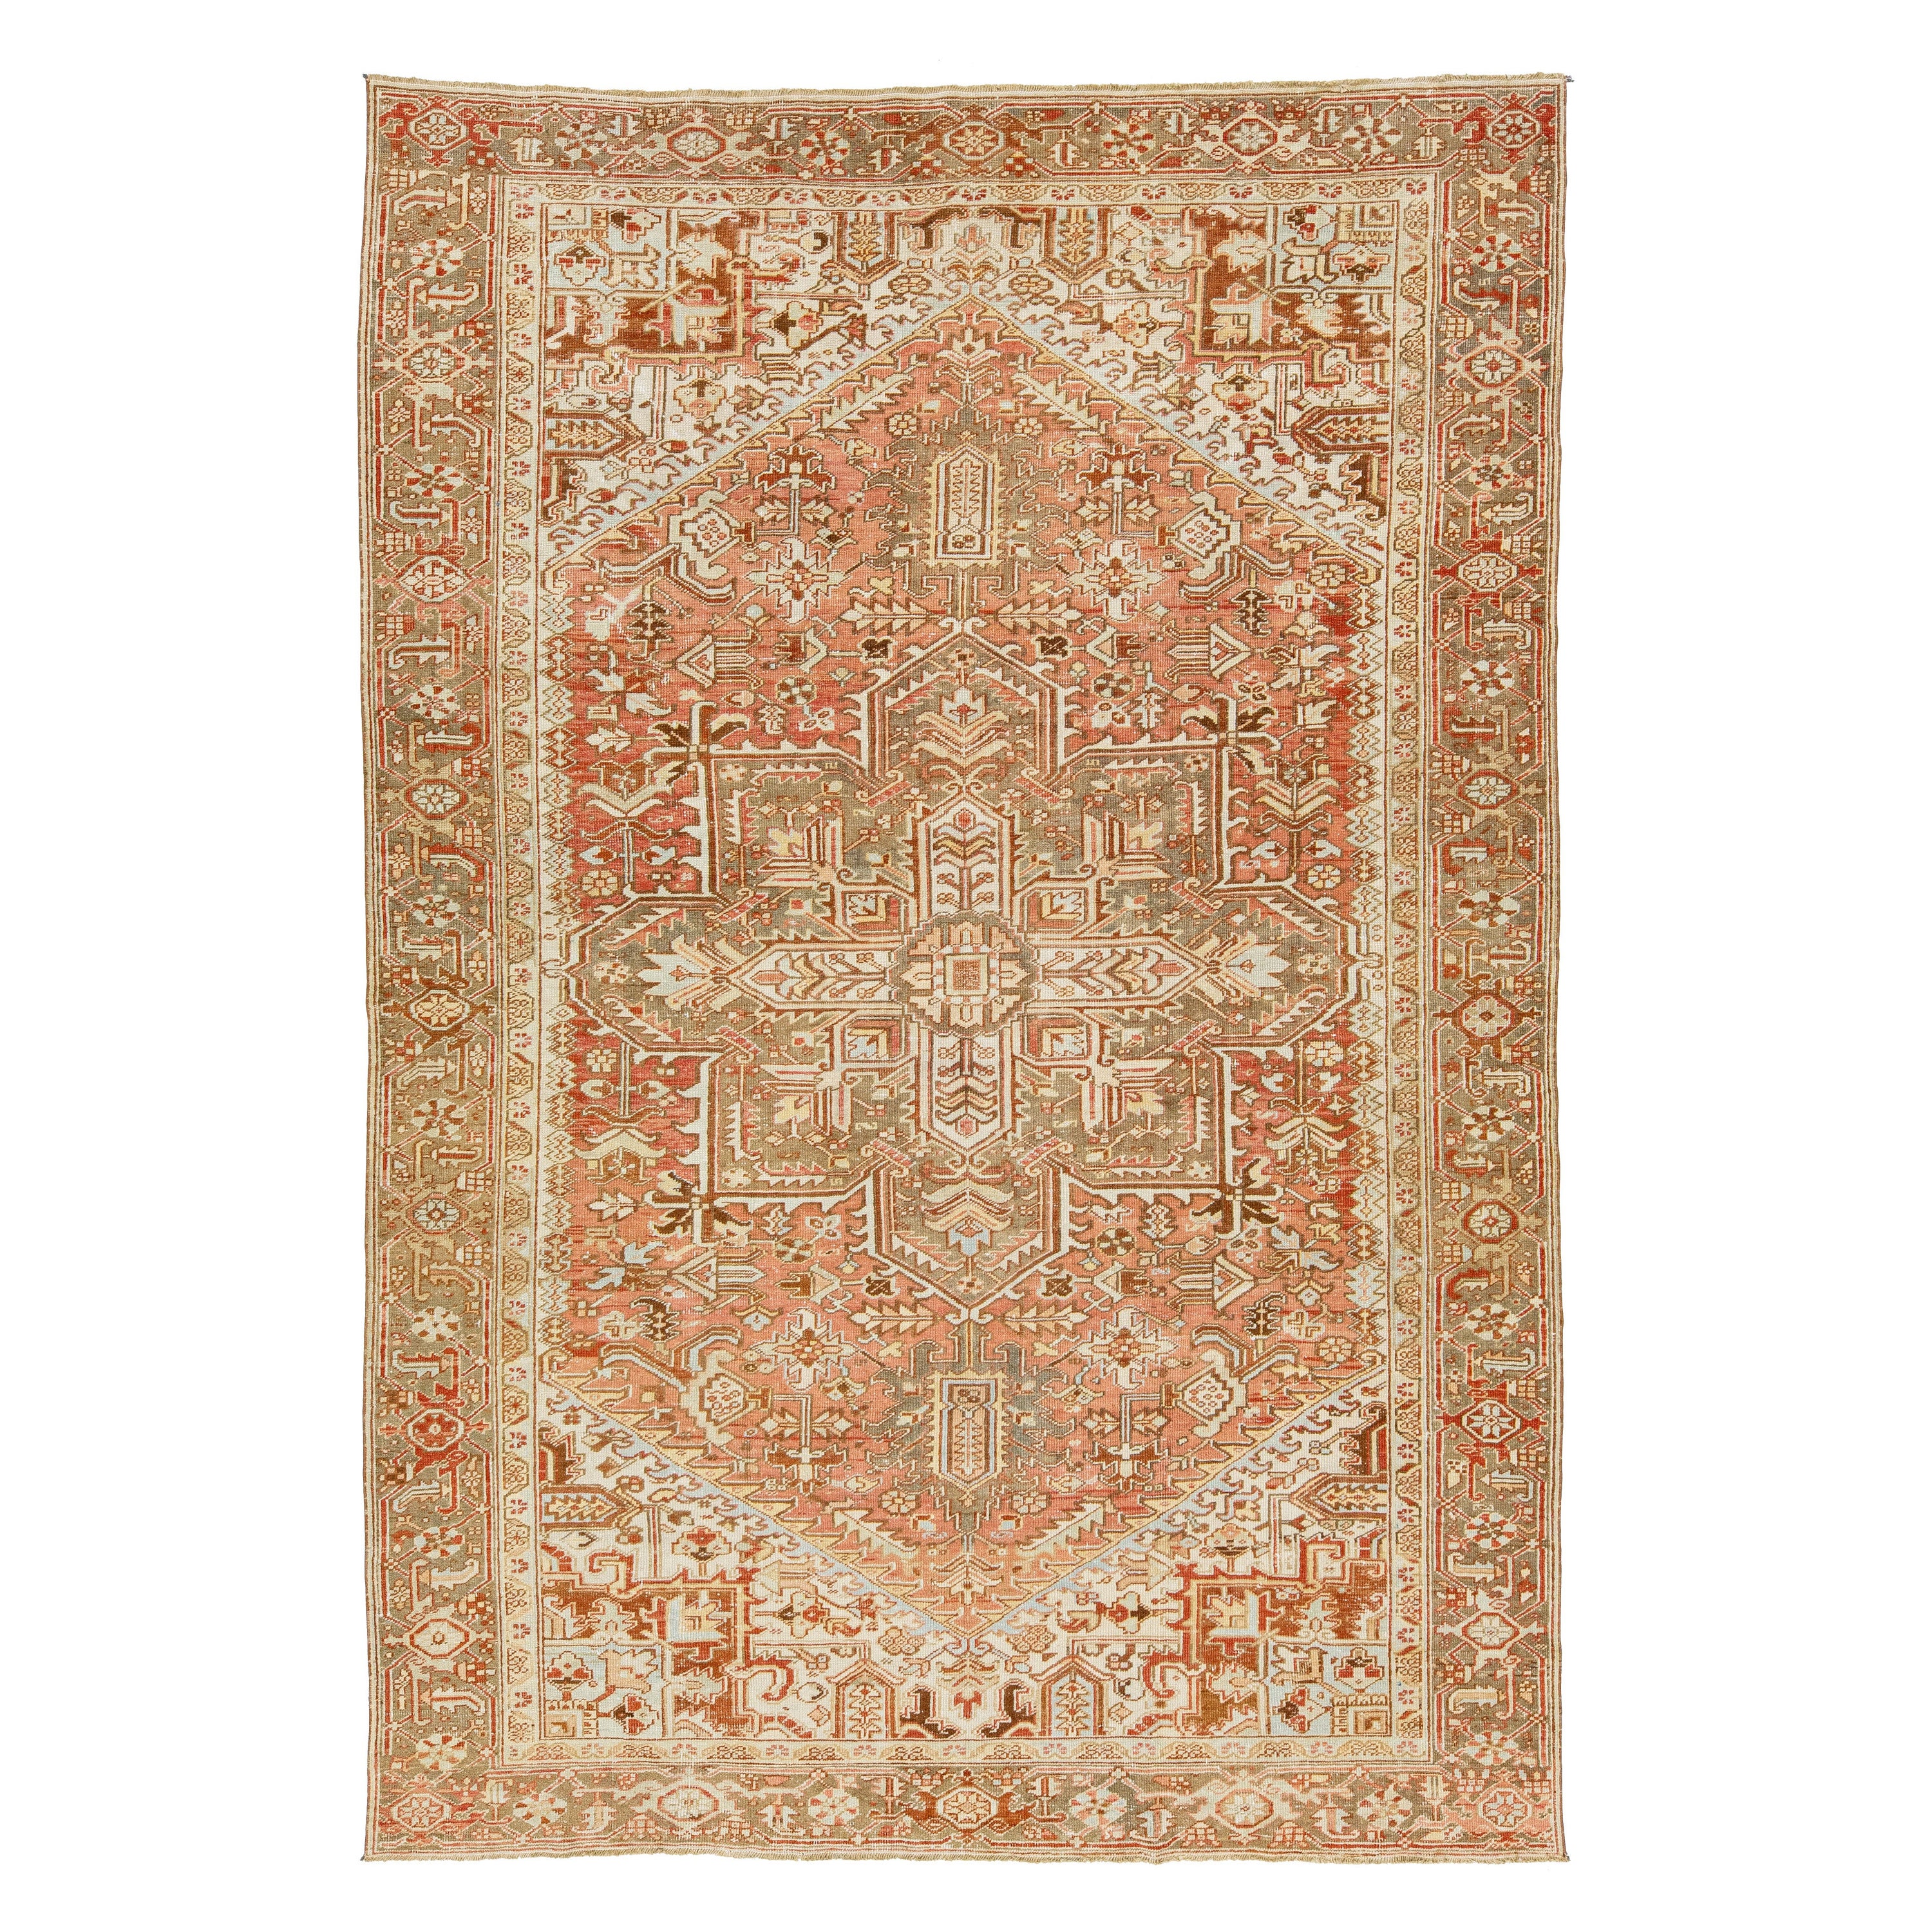 1920s Persian Heriz Antique Wool Rug In Rust Color Featuring a Medallion Motif